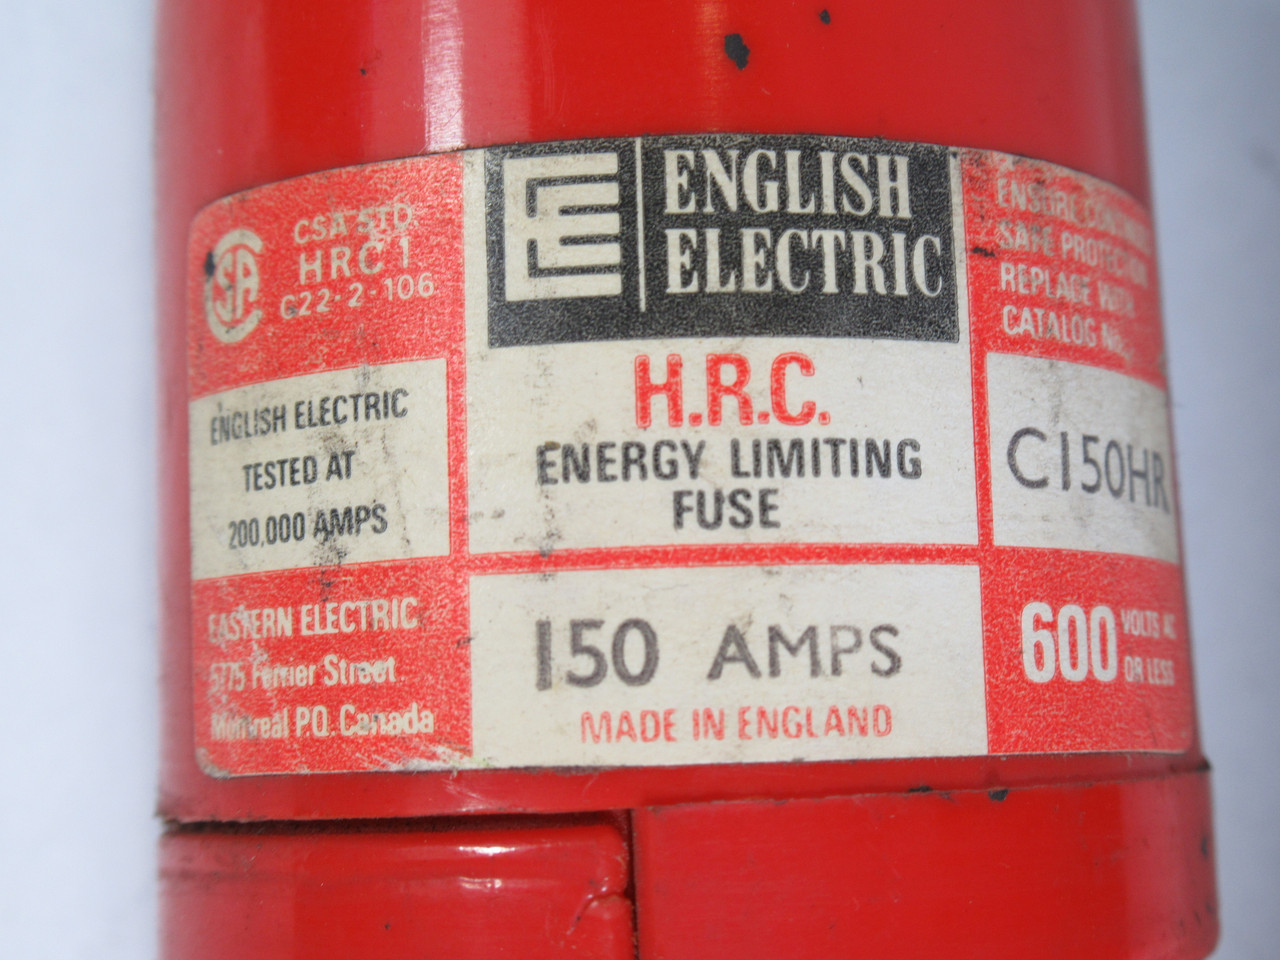 English Electric C150HR HRC Energy Limiting Fuse 150A 600VAC USED